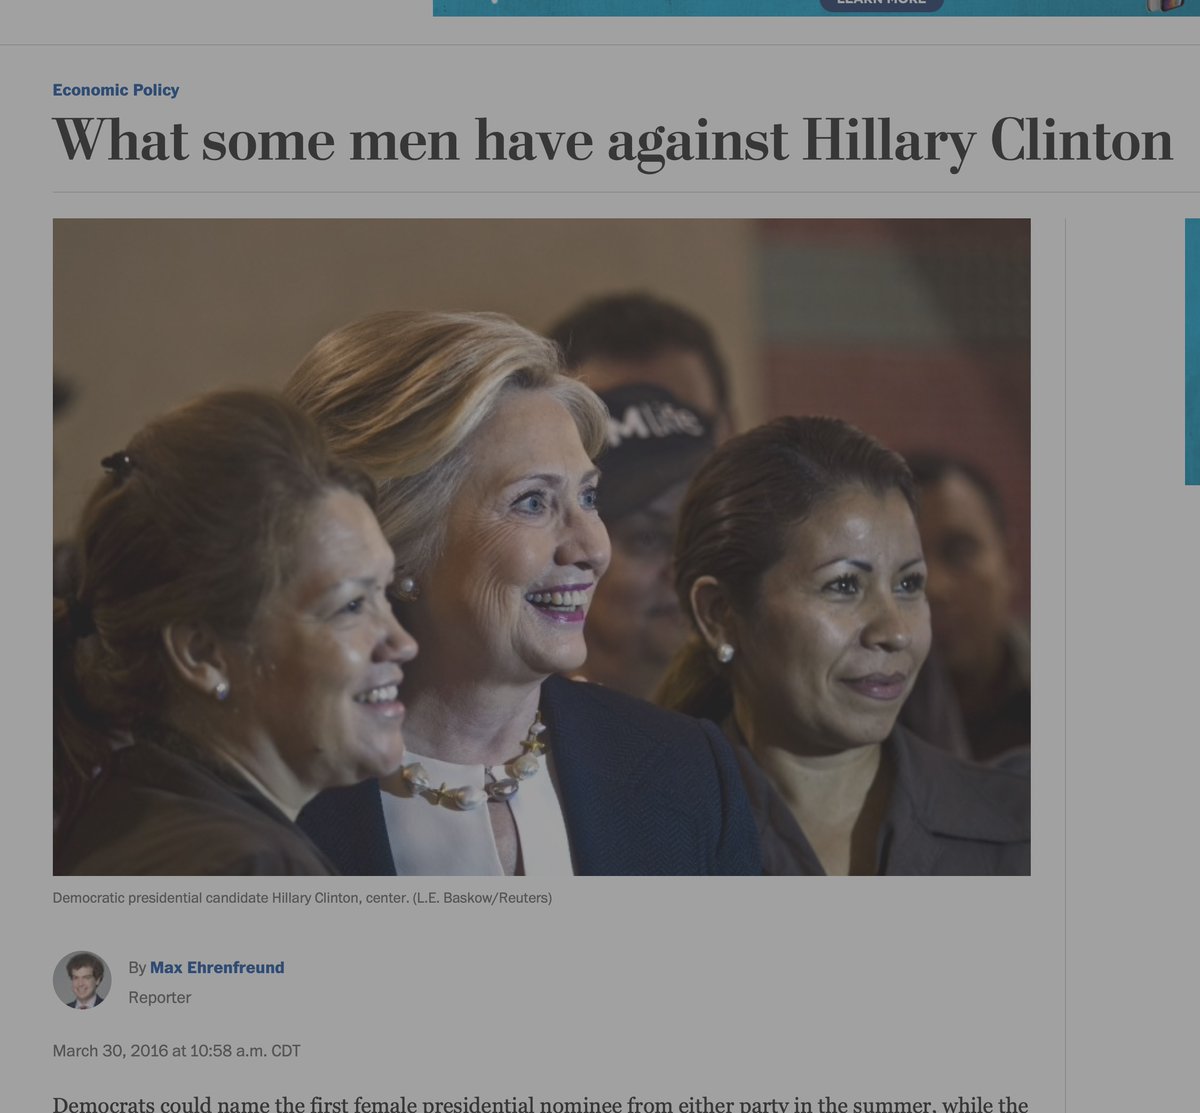 Google shows the top stories about Hillary the day after she gave that Supreme Court speech:1. Fortune: "This is Why We're So Obsessed With Hillary's Hair"2. WP: "What Some Men Have Against Hillary Clinton"3. The Atlantic: "On Hillary Clinton as a 'Congenital Liar'" 5/